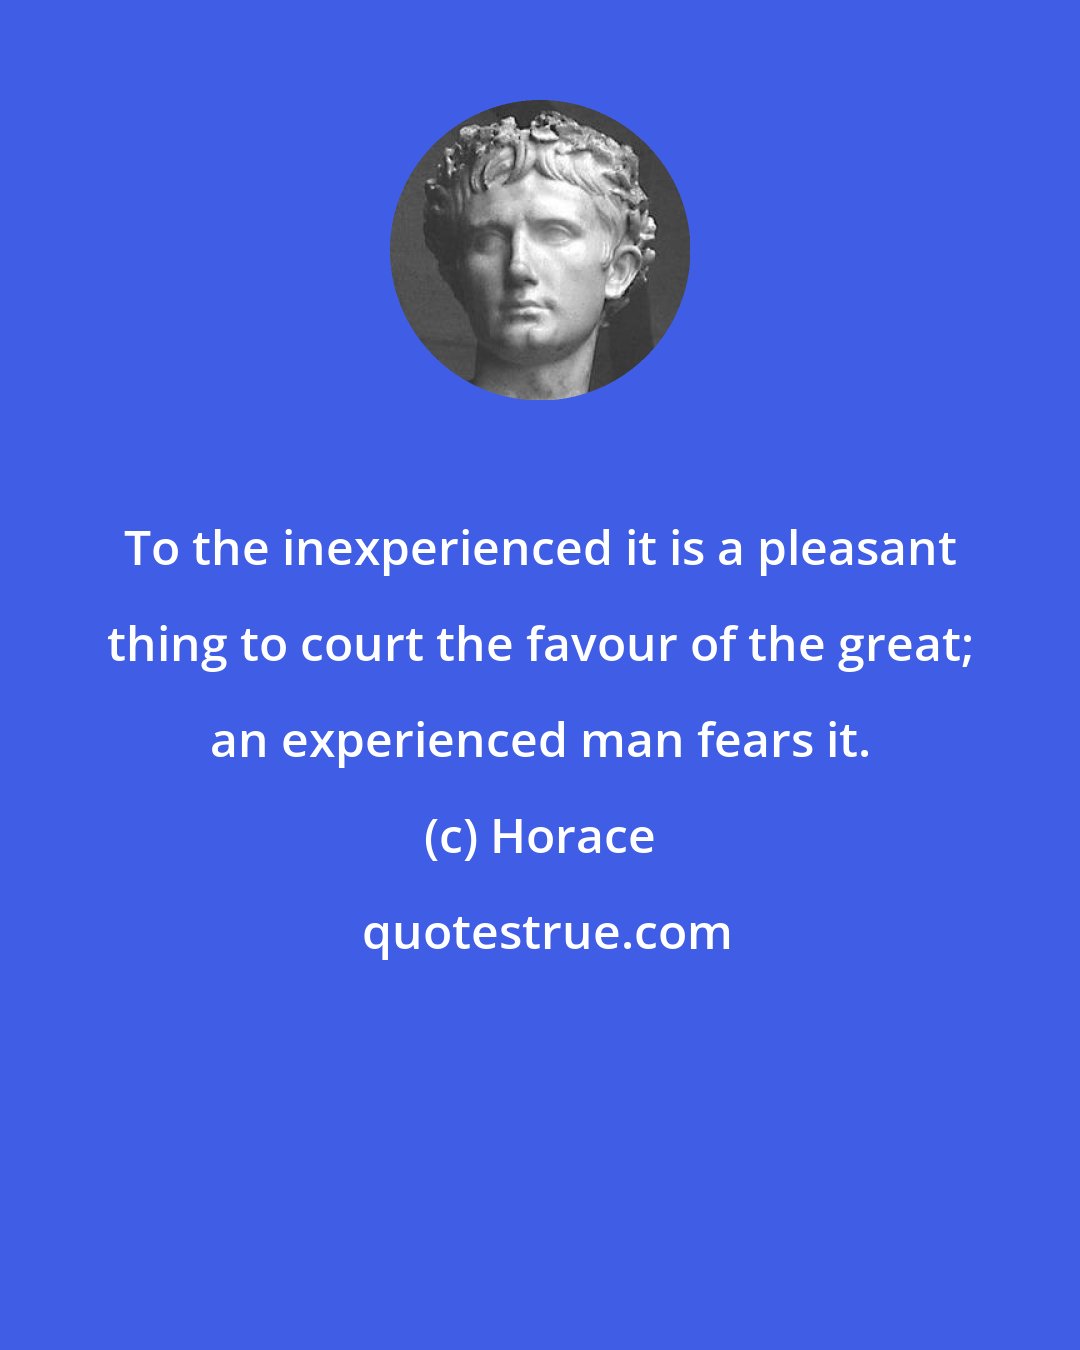 Horace: To the inexperienced it is a pleasant thing to court the favour of the great; an experienced man fears it.